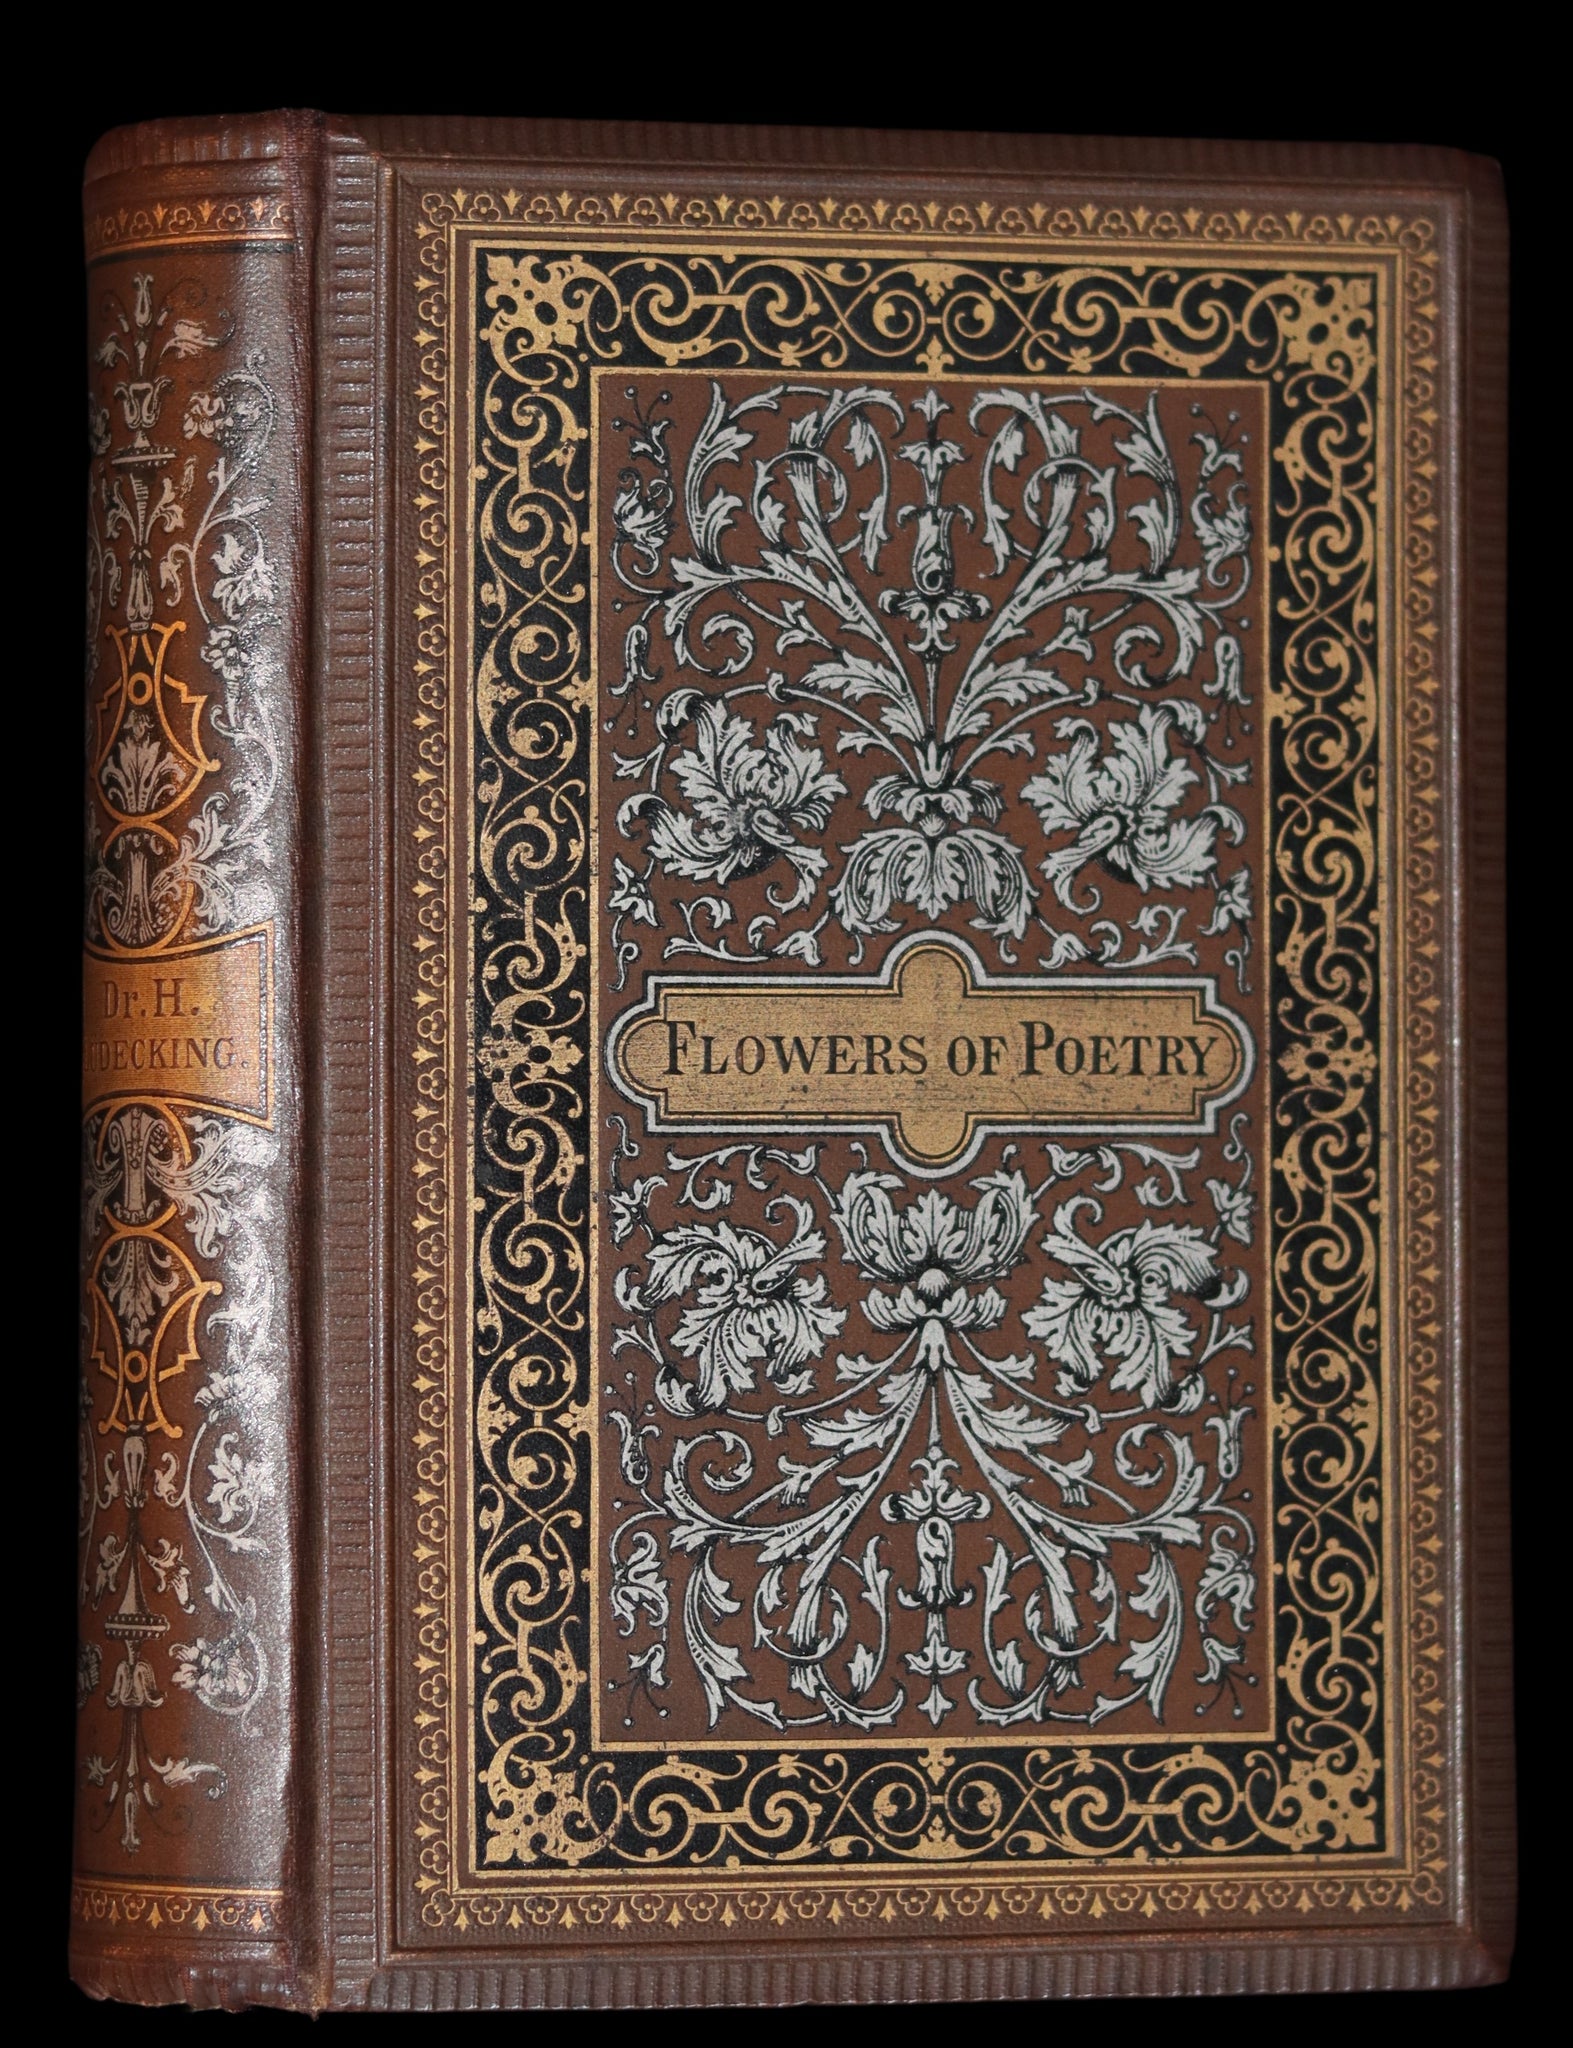 1884 Rare poetry Book - Flowers of Poetry. A Selection of English Poems by Dr. Heinrich Lüdecking. Illustrated.